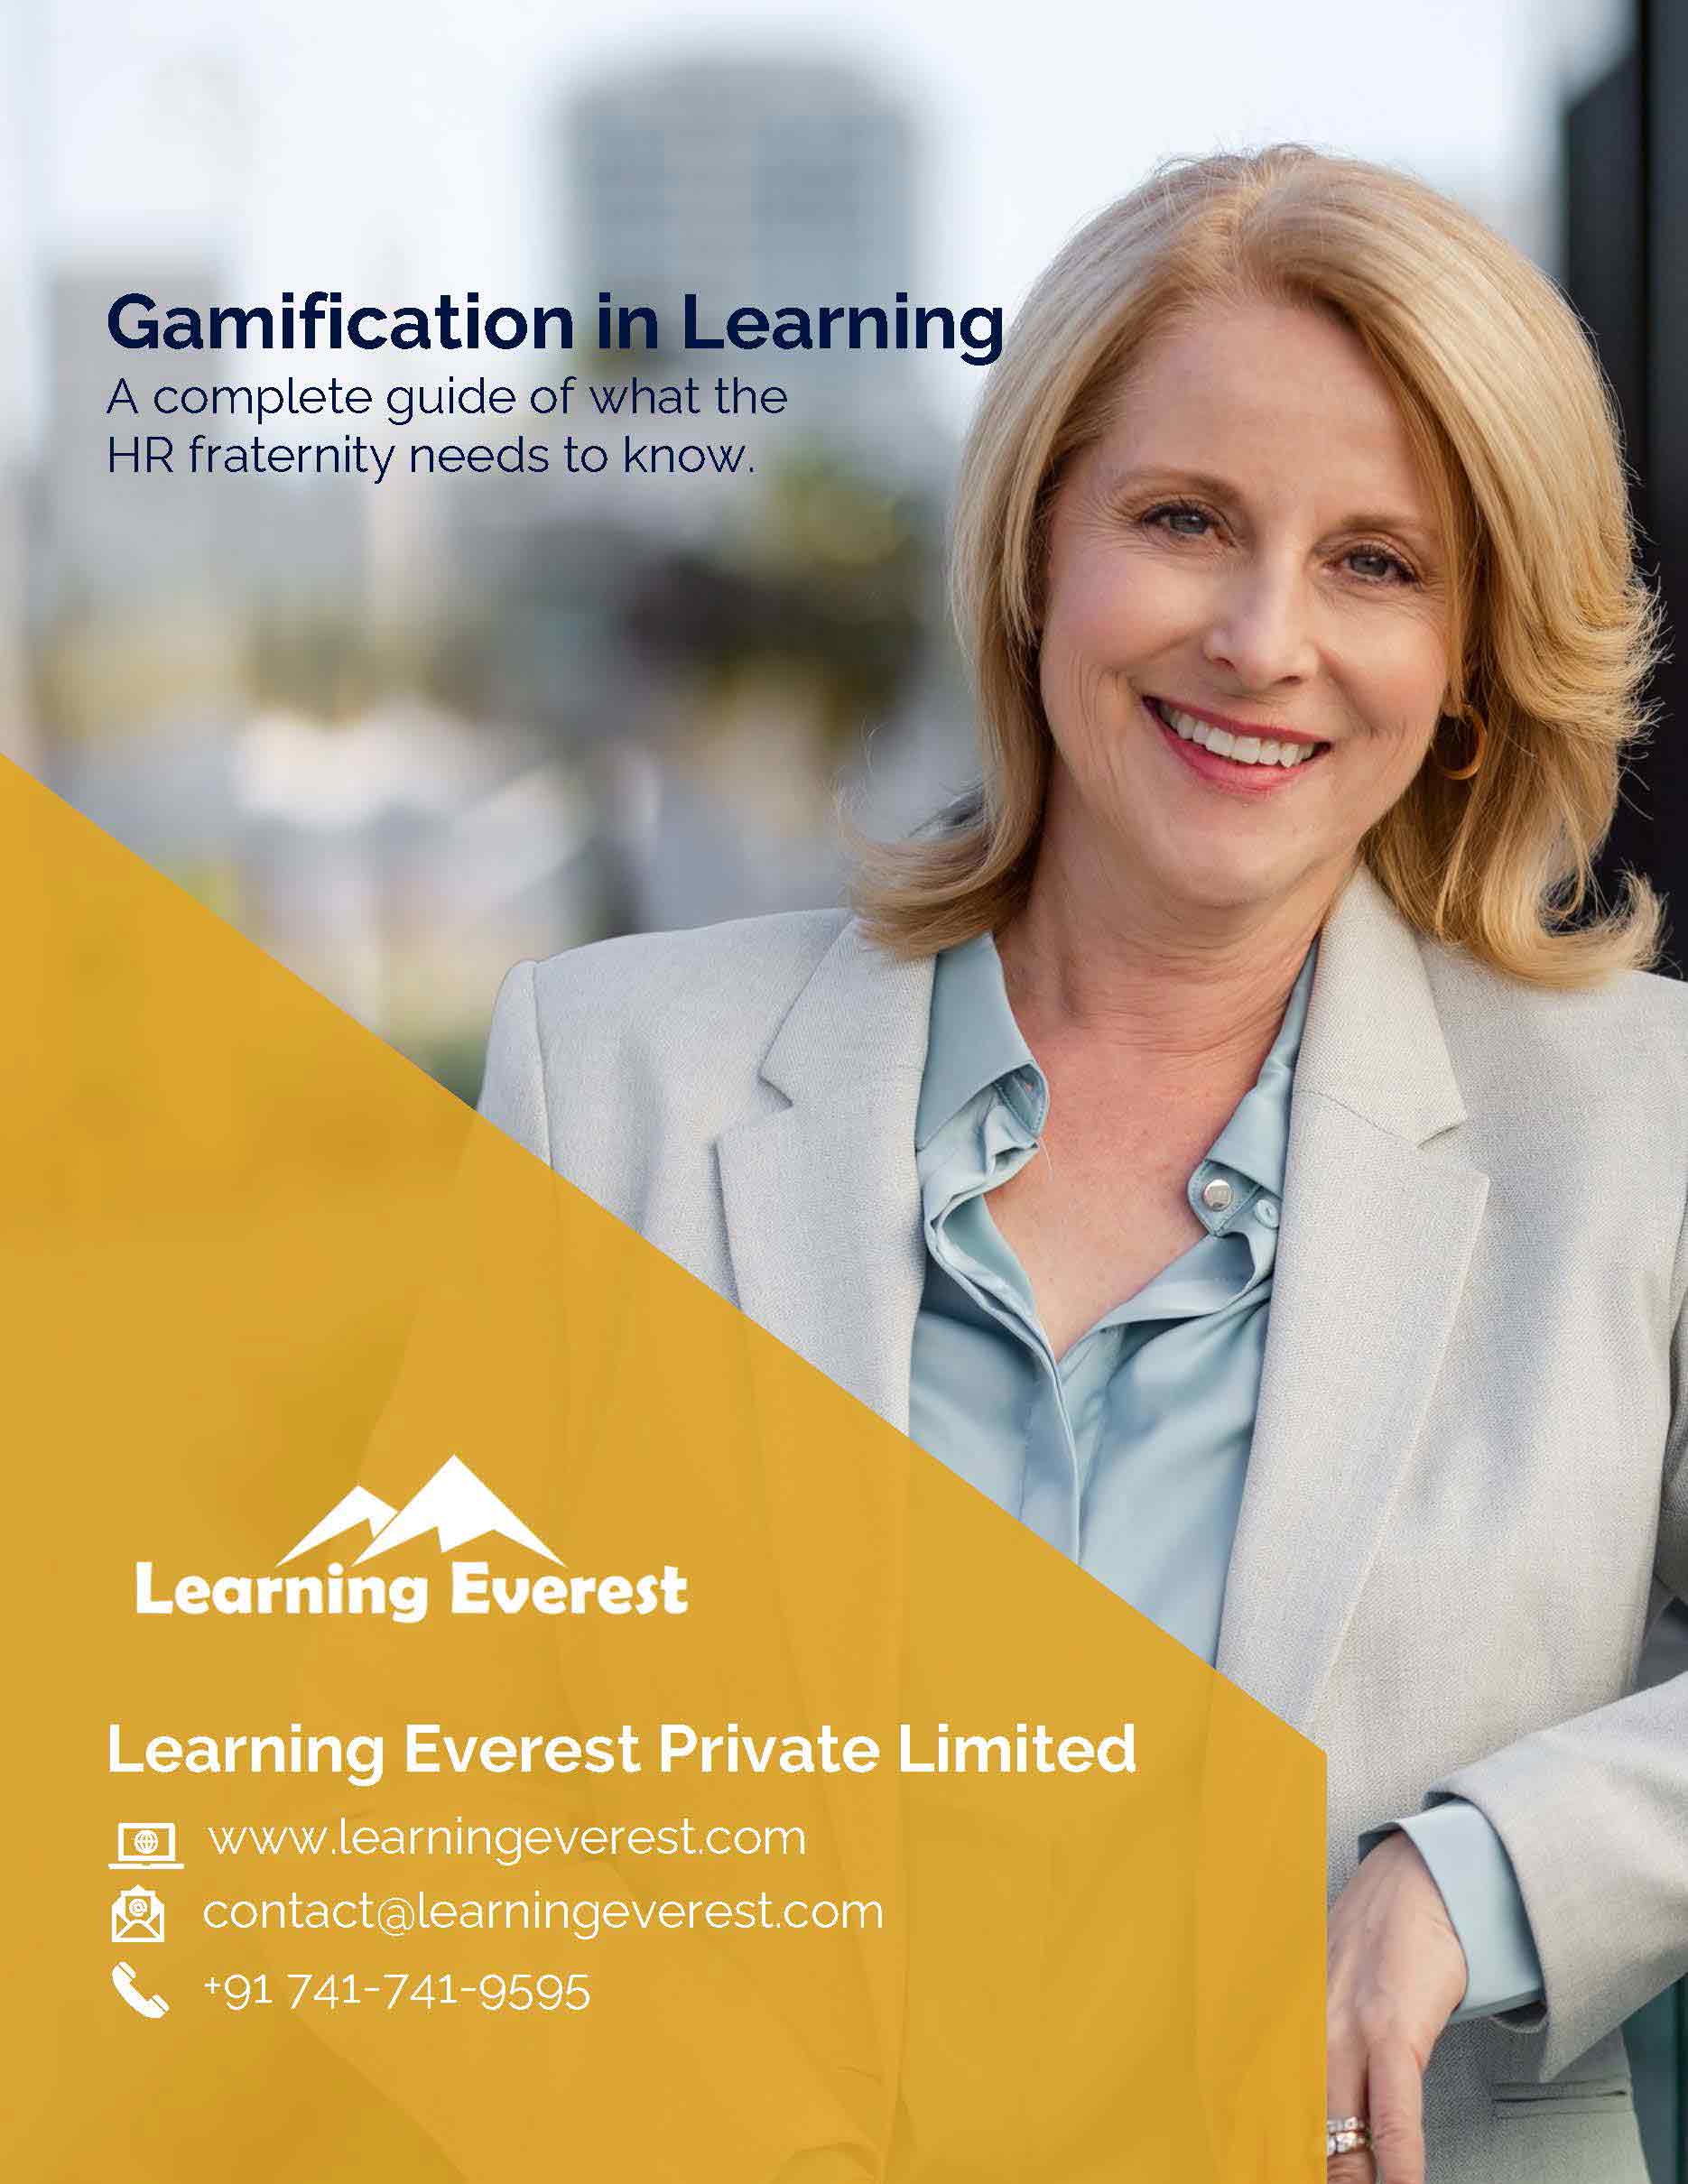 Gamification in Learning - A complete guide of what the HR fraternity needs to know - eBook